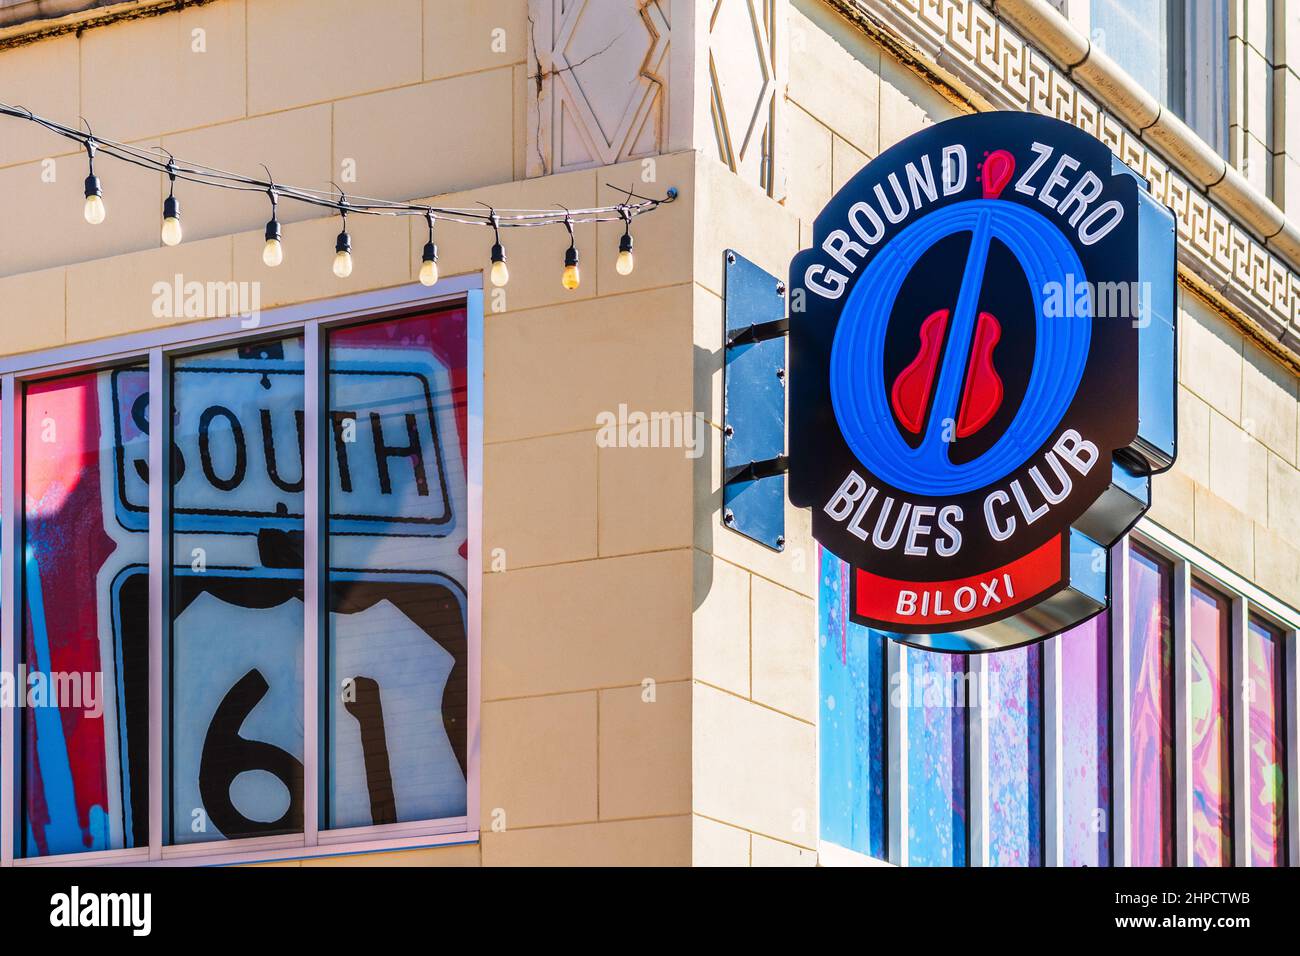 Ground Zero Blues Club, co-owned by actor Morgan Freeman, opened its second location in Feb.2022 on historic Howard Ave in Biloxi, Mississippi, USA. Stock Photo